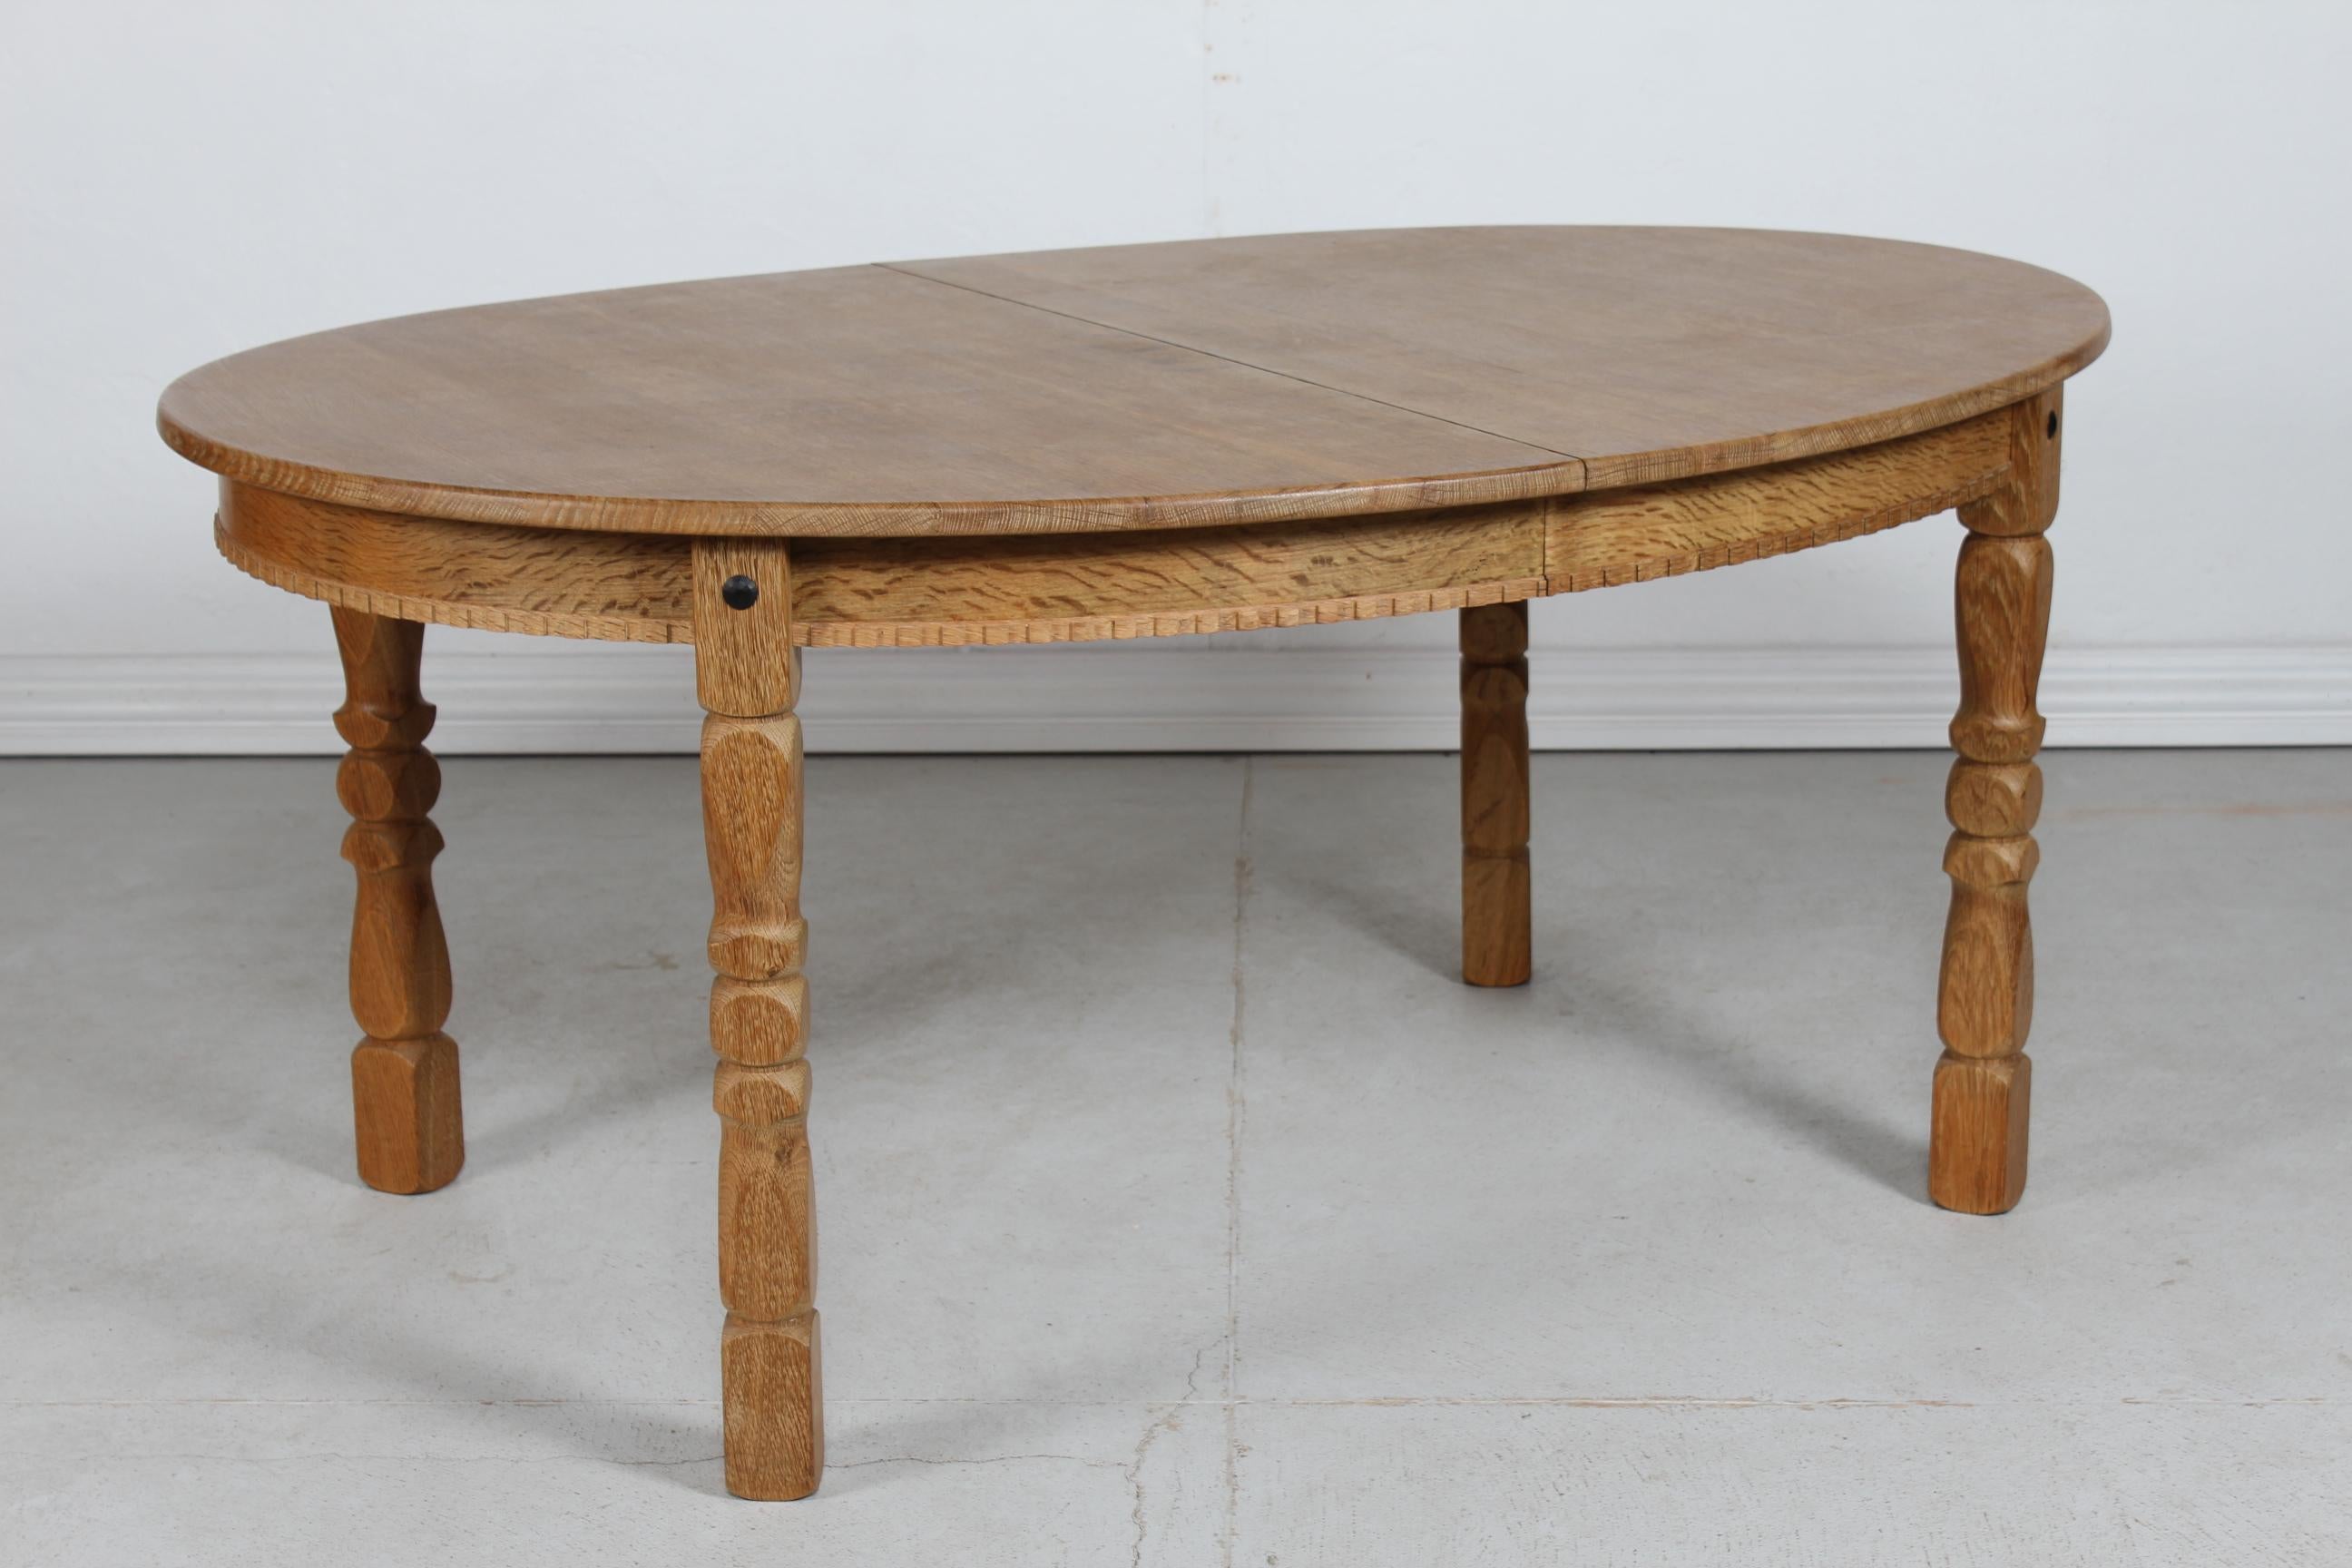 Danish vintage Henning Kjærnulf style oval extendable dining table with turned and carved legs.
Manufactured in Denmark in the 1970s. most likely by EG Møbler

The table is made of solid and oak veneer.
It can be extended with two leaves.